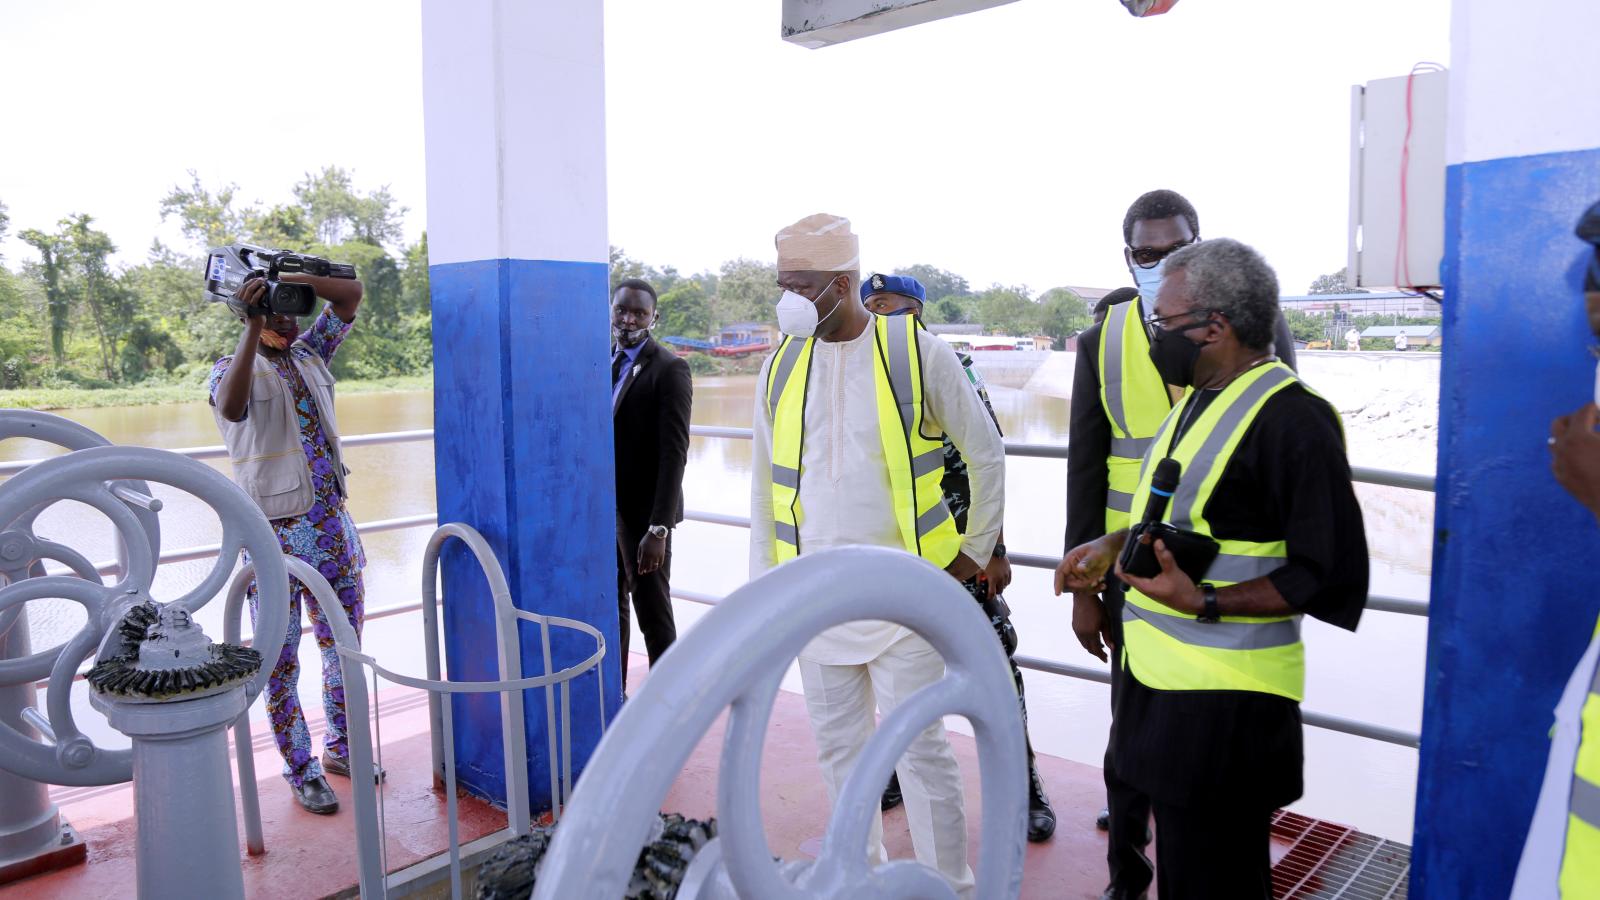 Governor Seyi Makinde and his entourage inspecting the newly refurbished Intake Tower of the Eleyele Dam facility